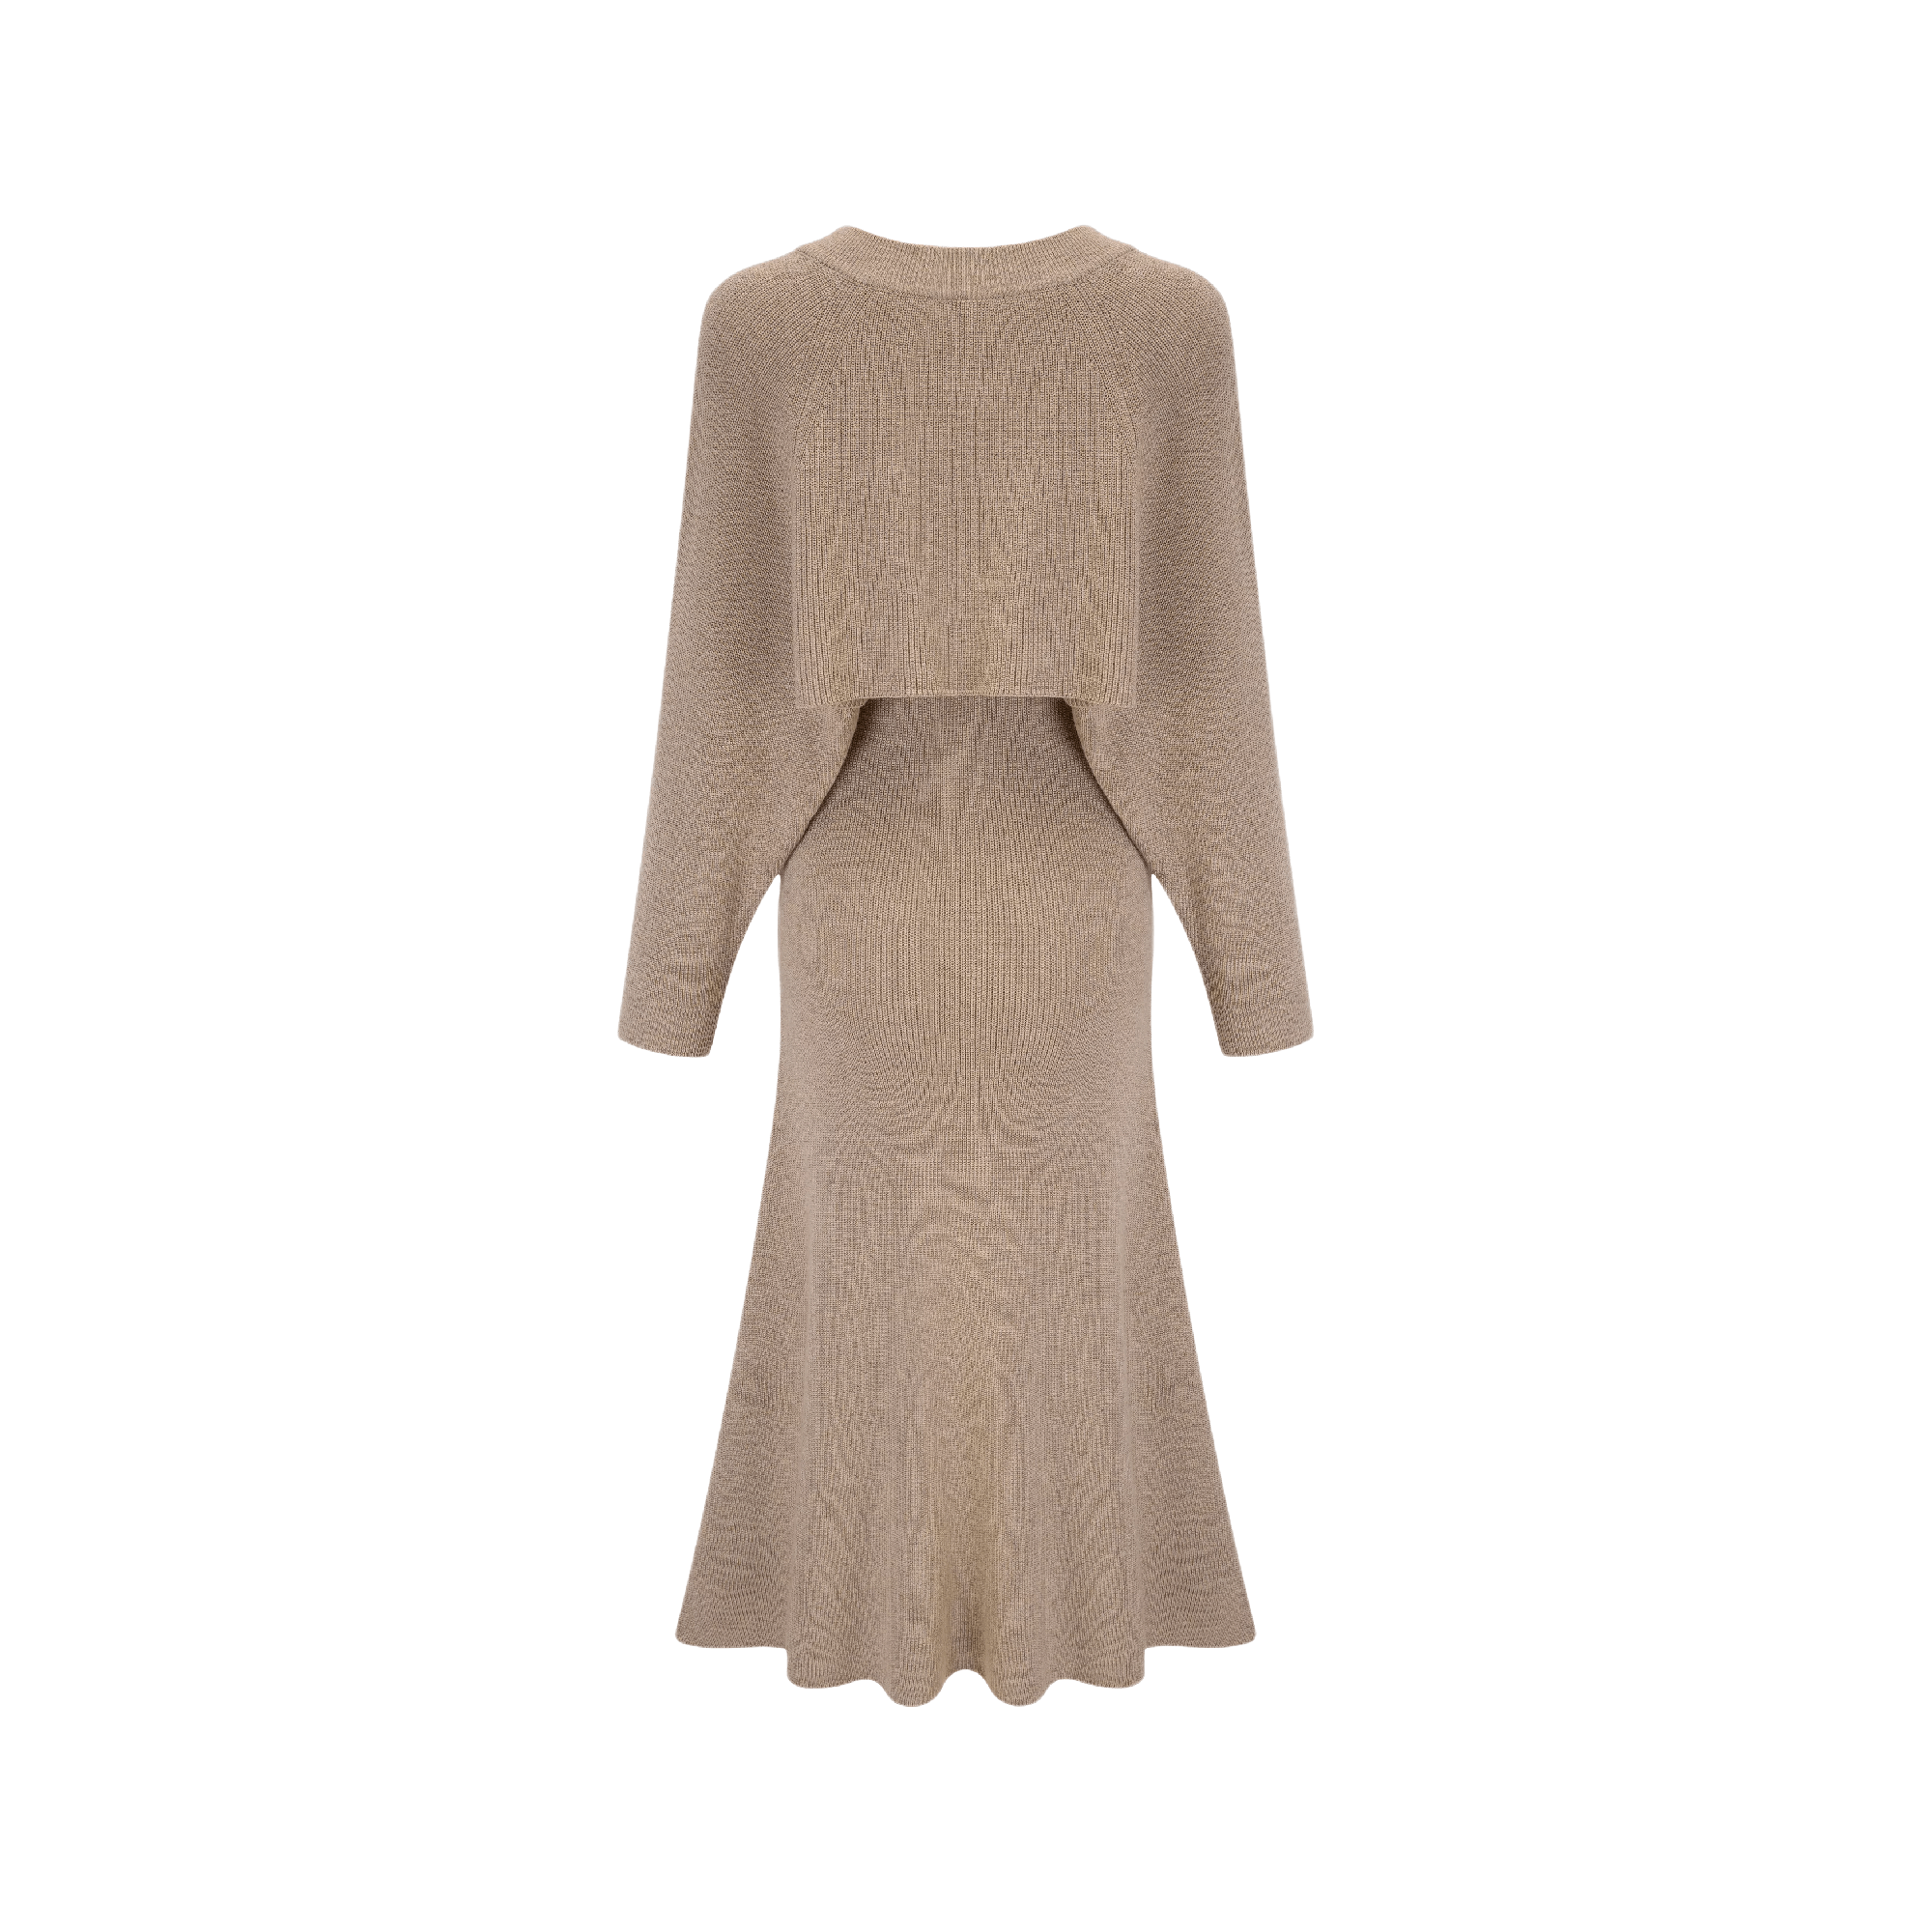 Hotline Bling-knitted long dress combo - itsy, it‘s different